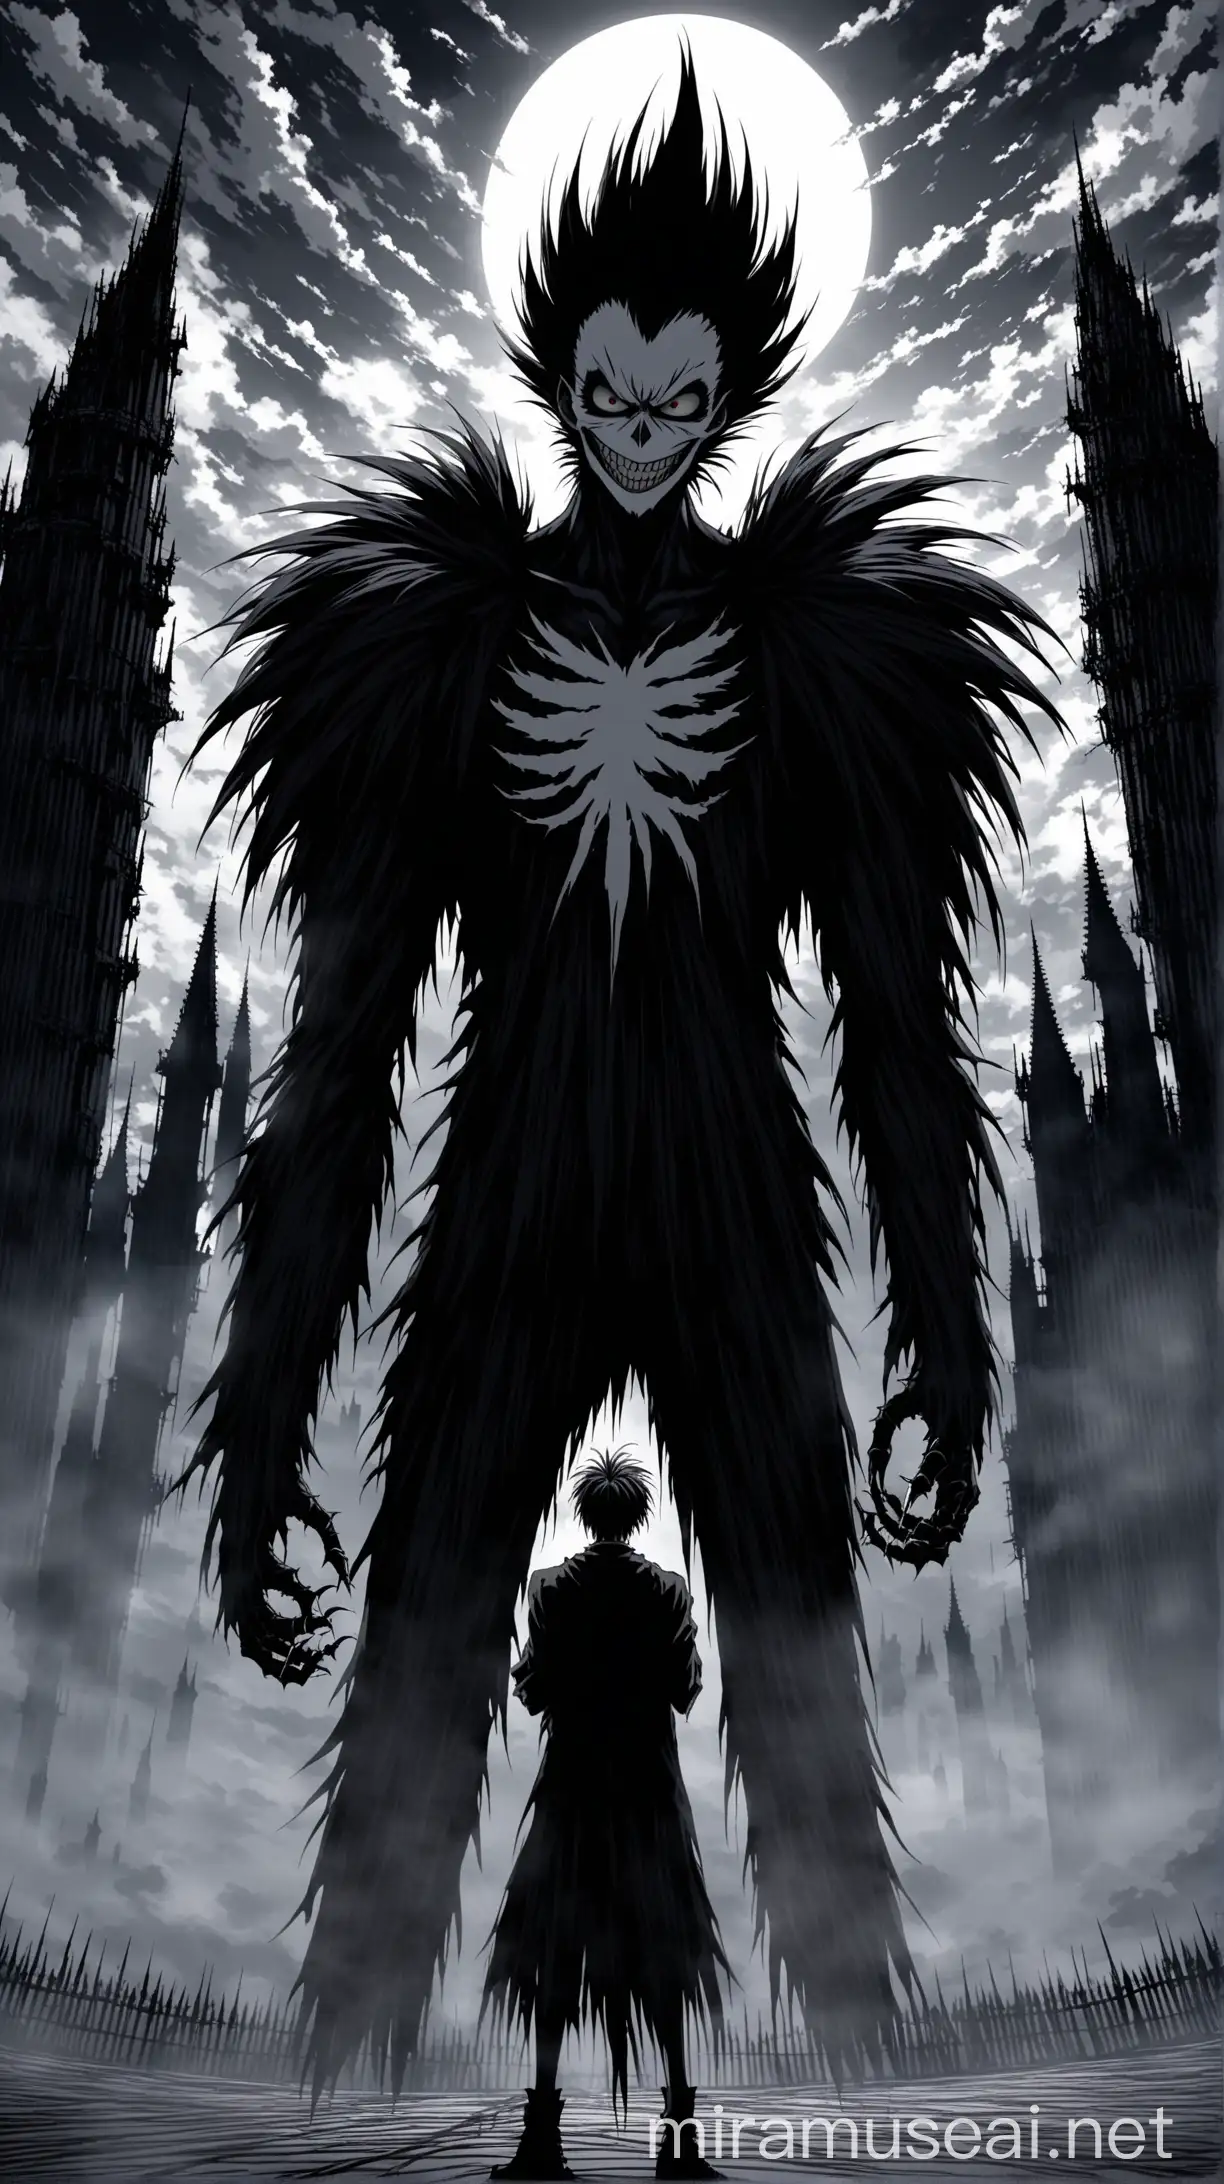 Ryuk standing to the towers a writing the Death note book.